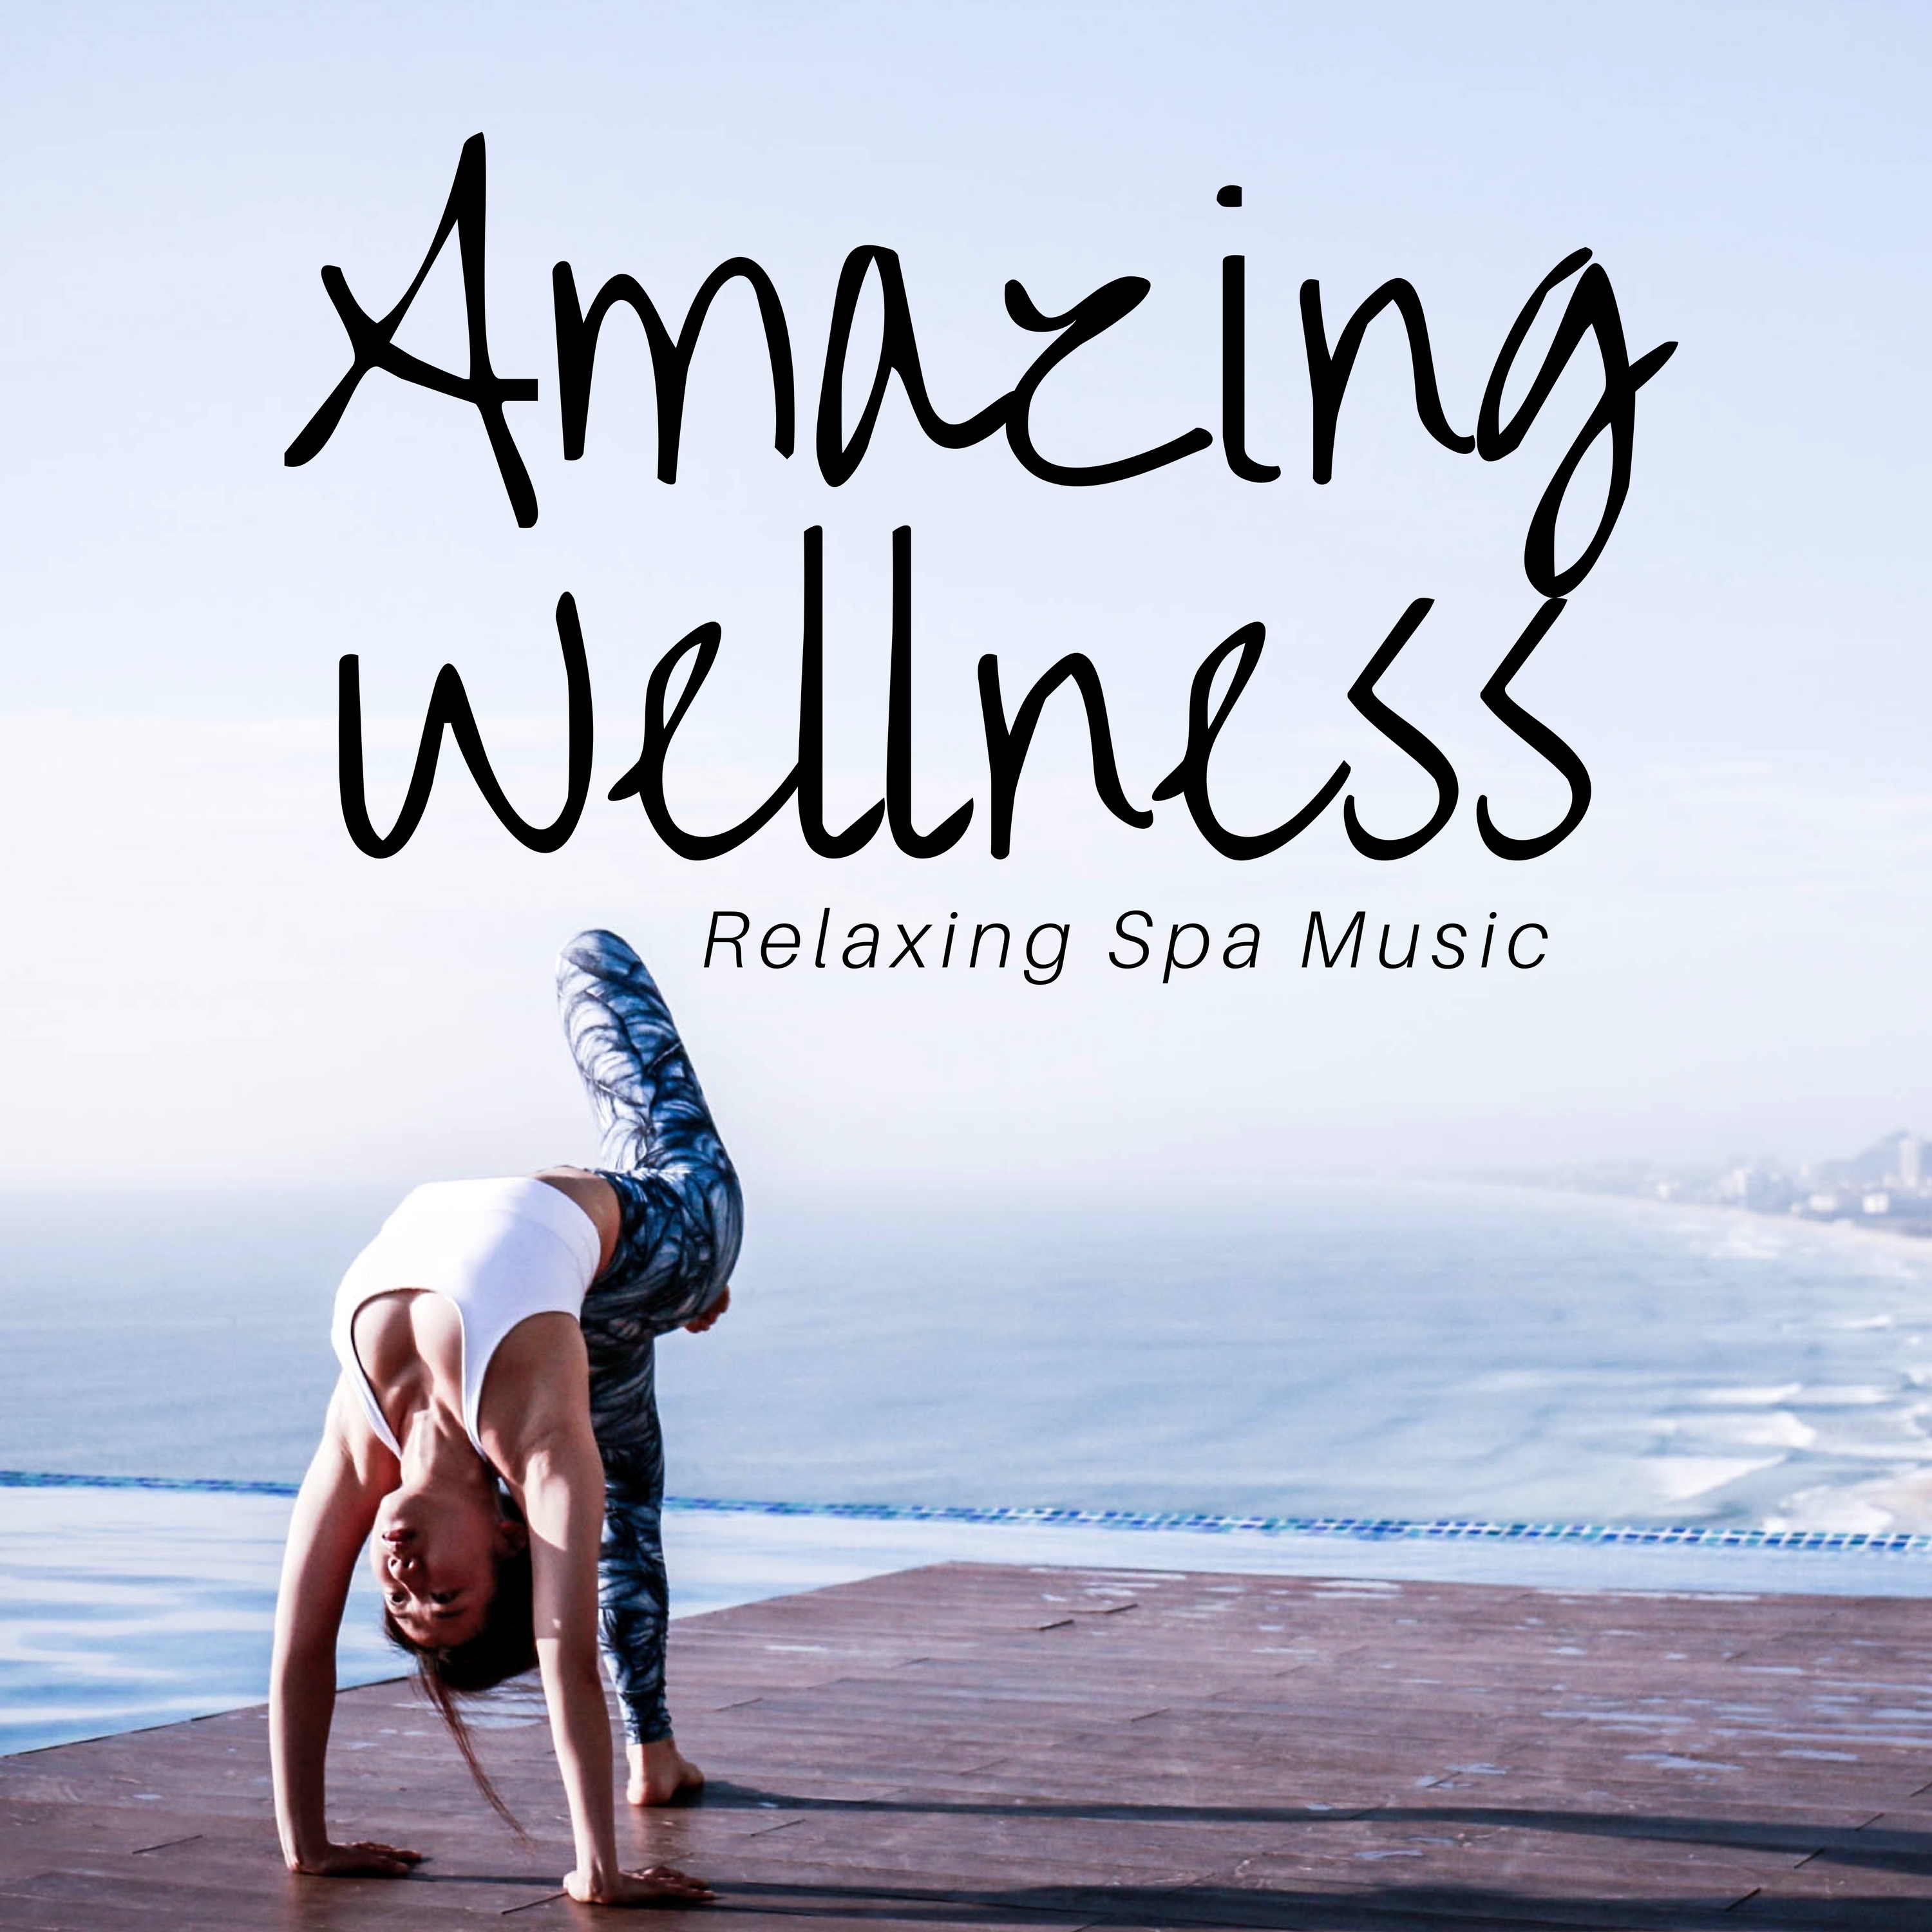 Amazing Wellness - Relaxing Spa Music, Healthy Relaxation, Full Body Massage, Treatment for Anxiety